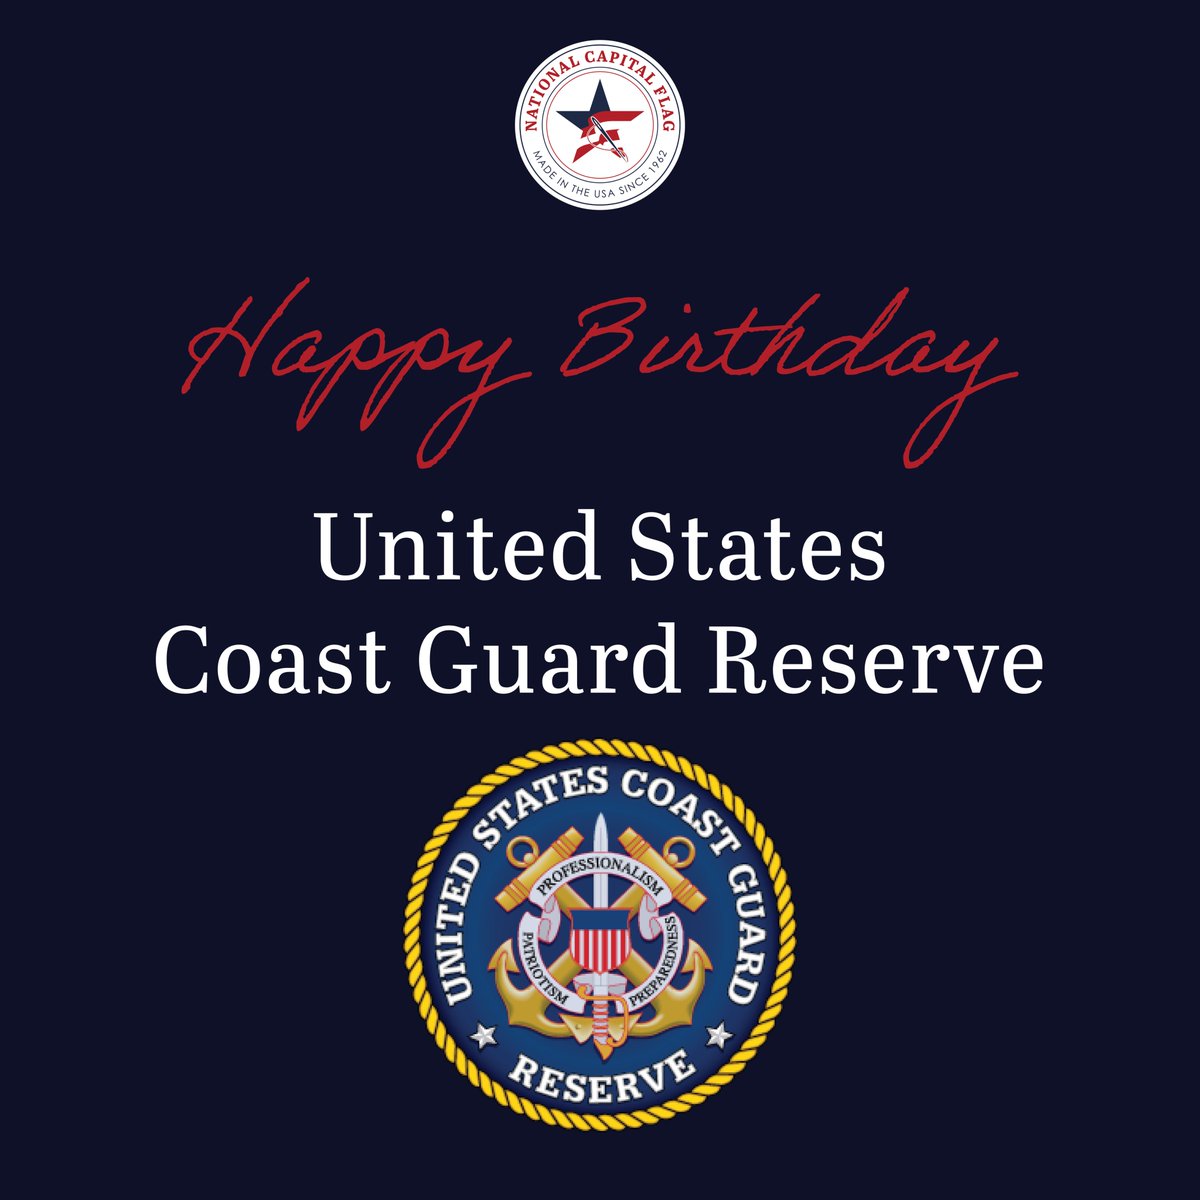 Did you know?

Today marks the 82nd birthday of the United States Coast Guard Reserve!

#NationalCapitalFlag #AlexandriaVA #USA #America #USCGR #USCoastGuardReserve #CoastGuardReserve #HappyBirthday